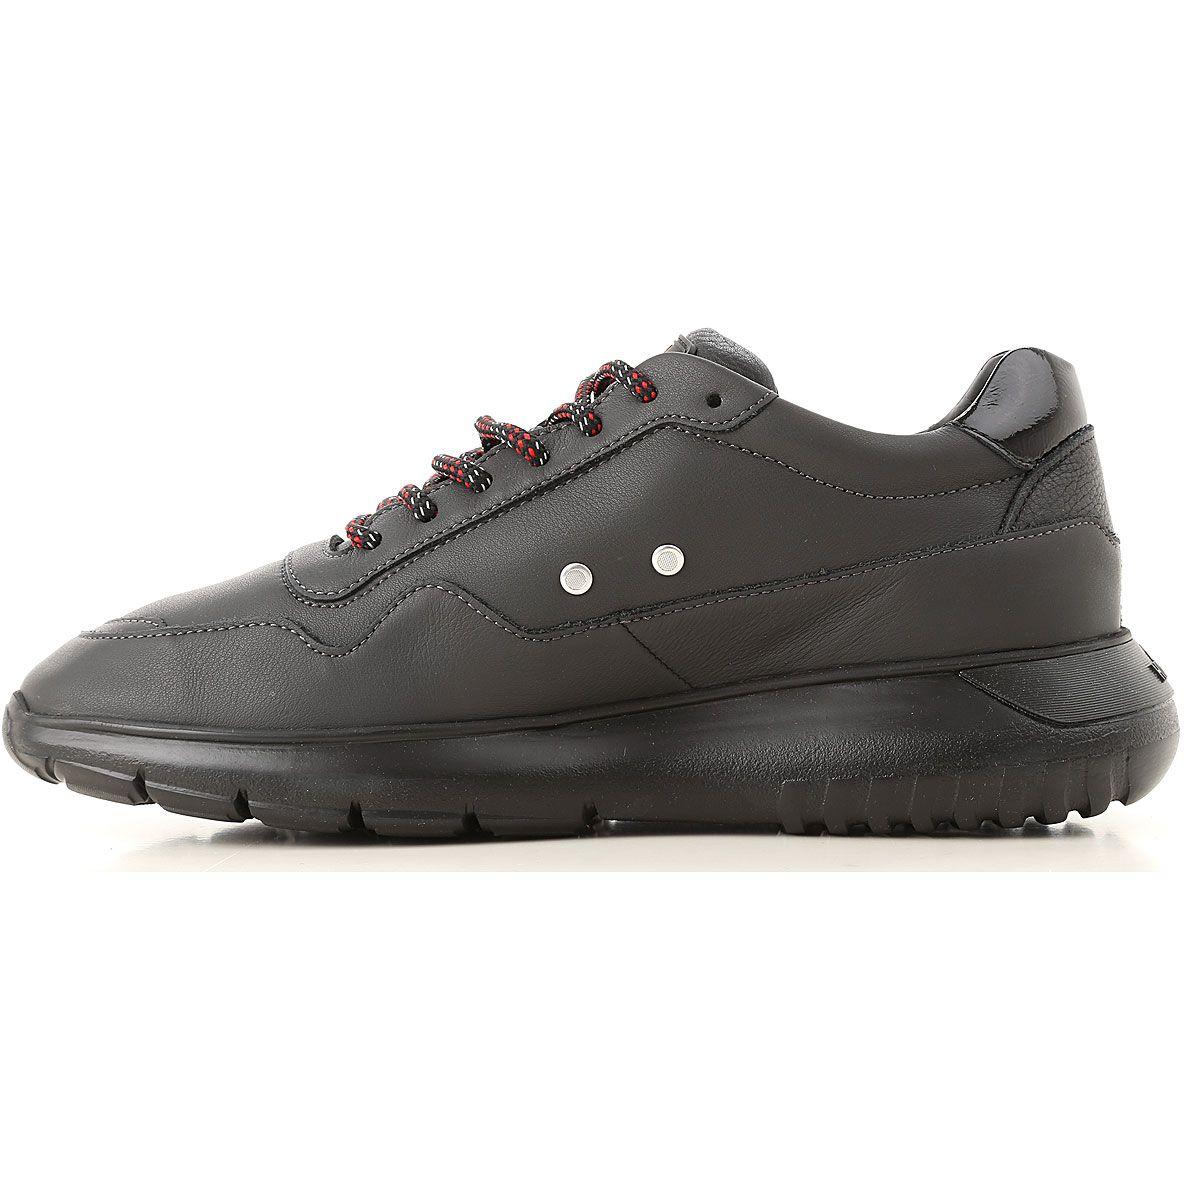 Black and Red H Logo - Hogan Shoes for Men Fall - Winter 2018/19 Black•Other colors:Red ...